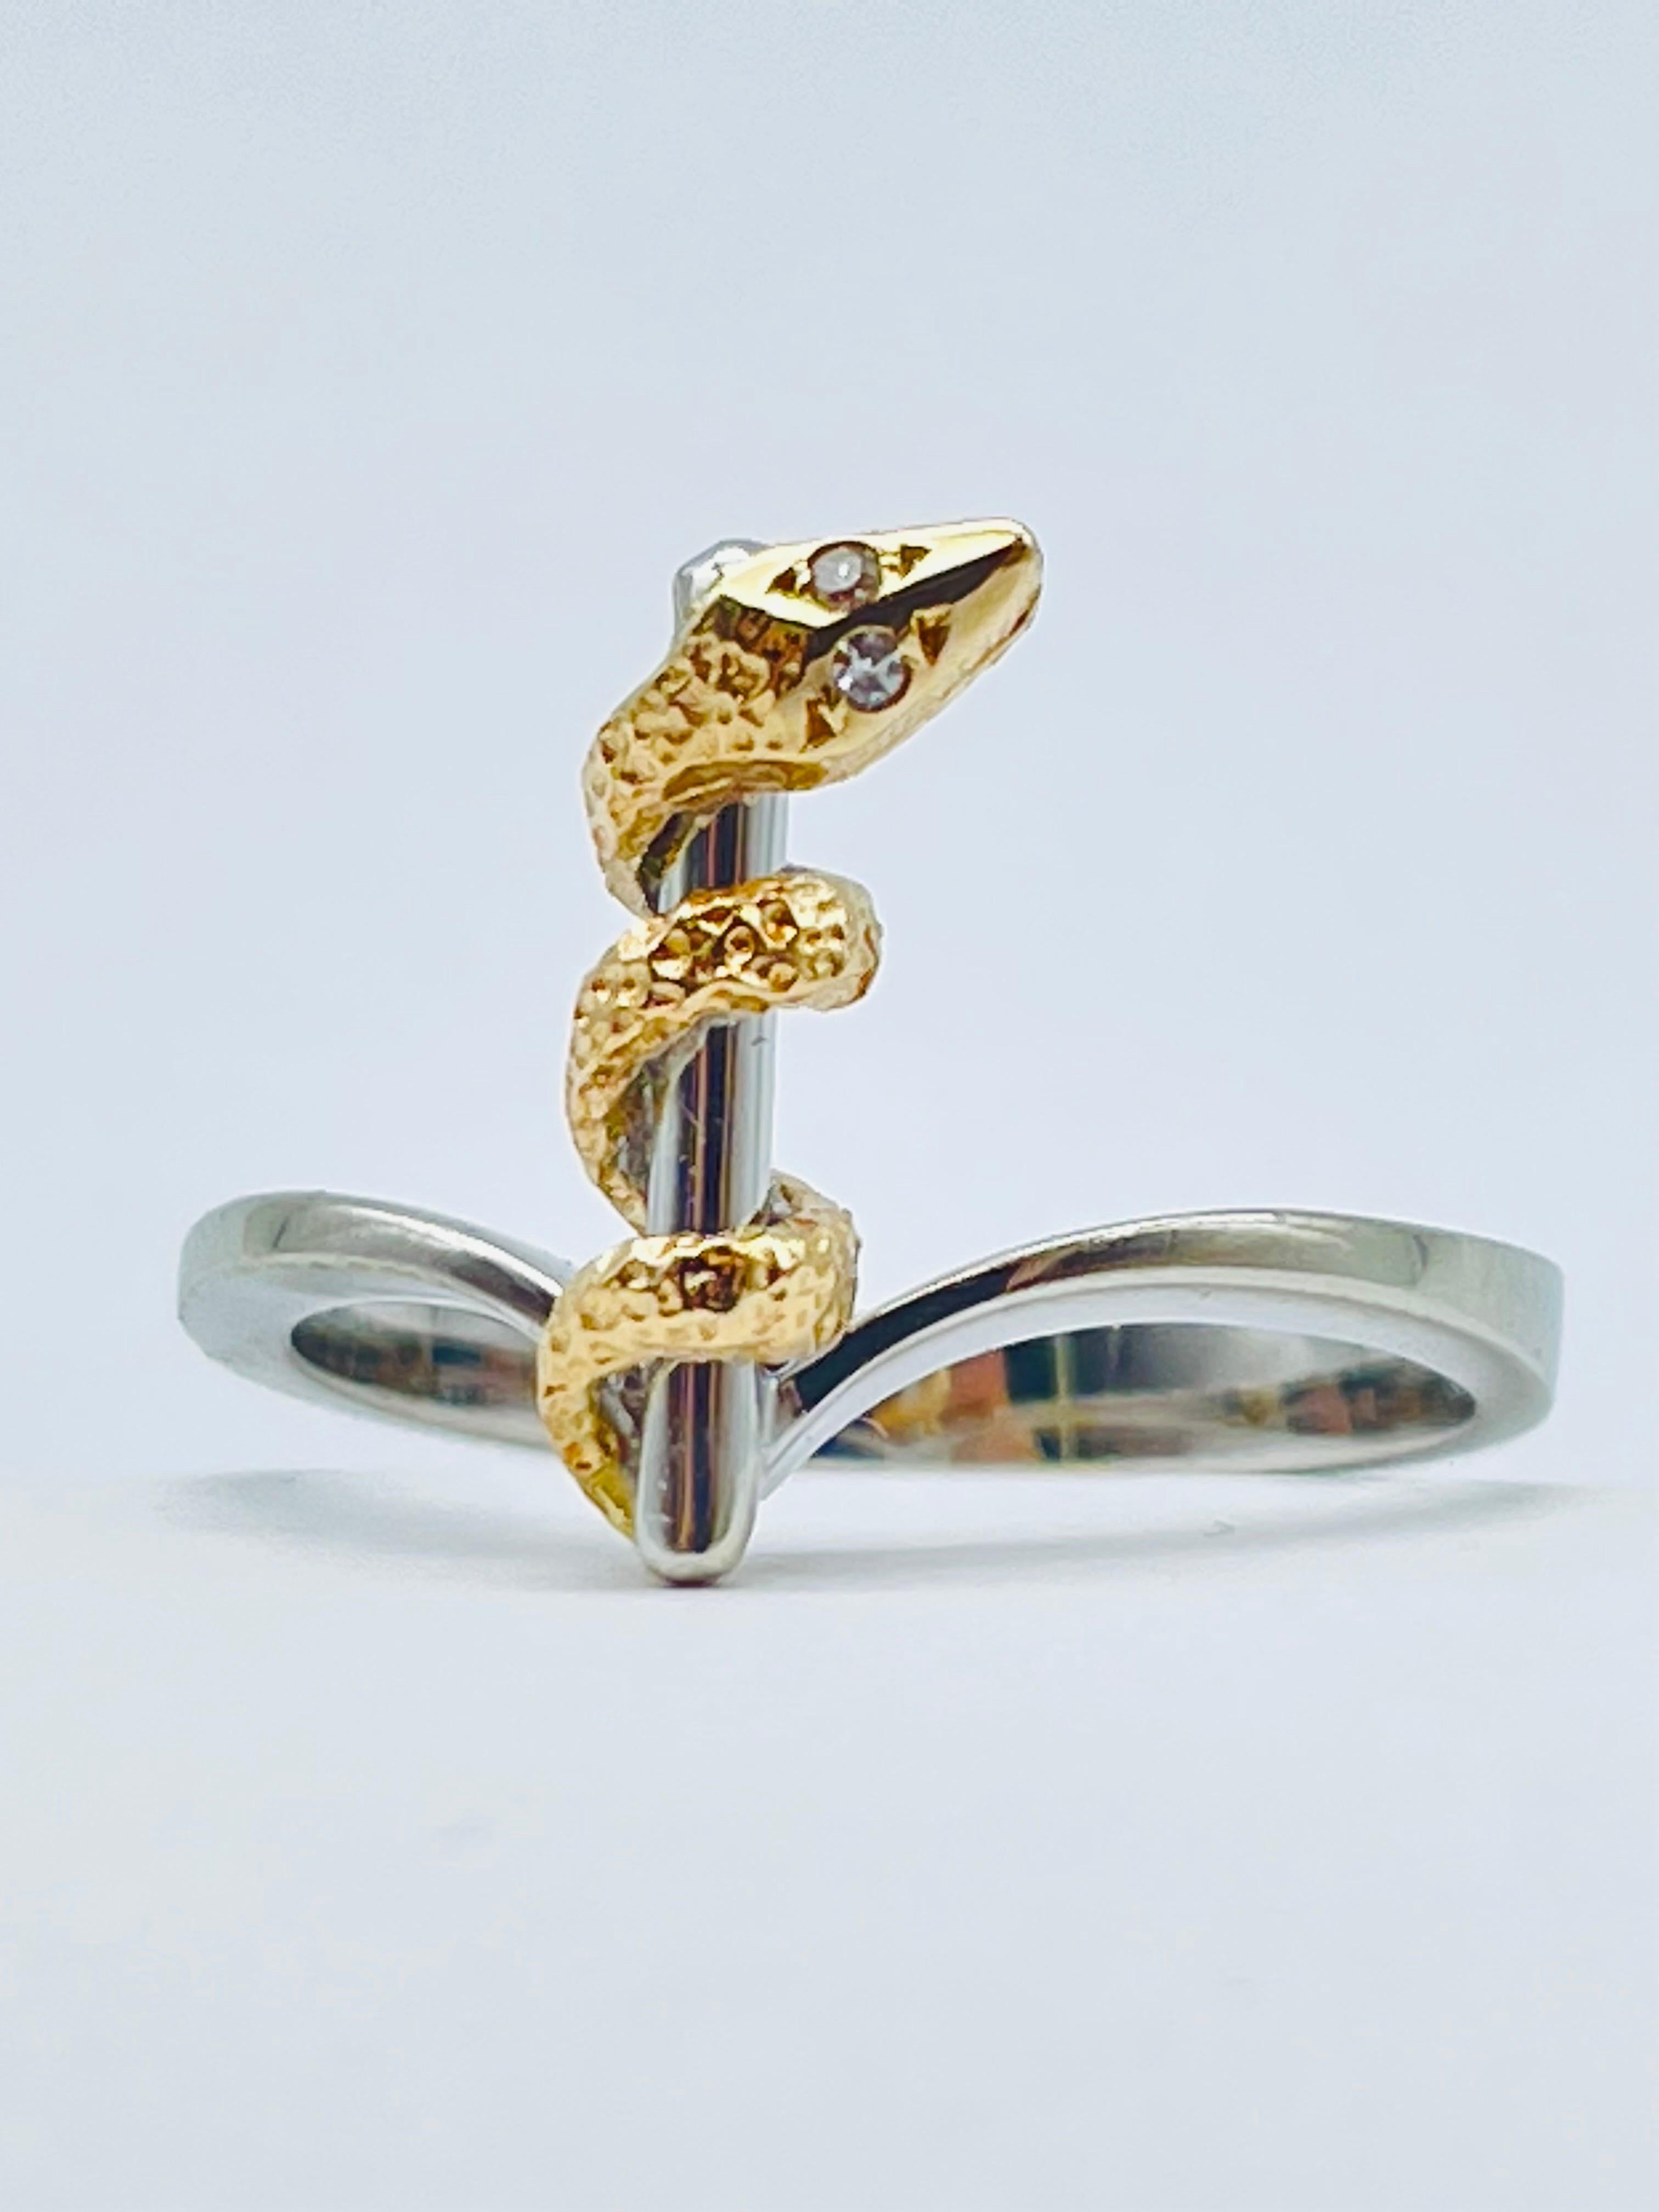 Women's or Men's Unique and Elegant Snake Bicolor Ring with Diamond Eyes White/Yellow Gold 14k For Sale